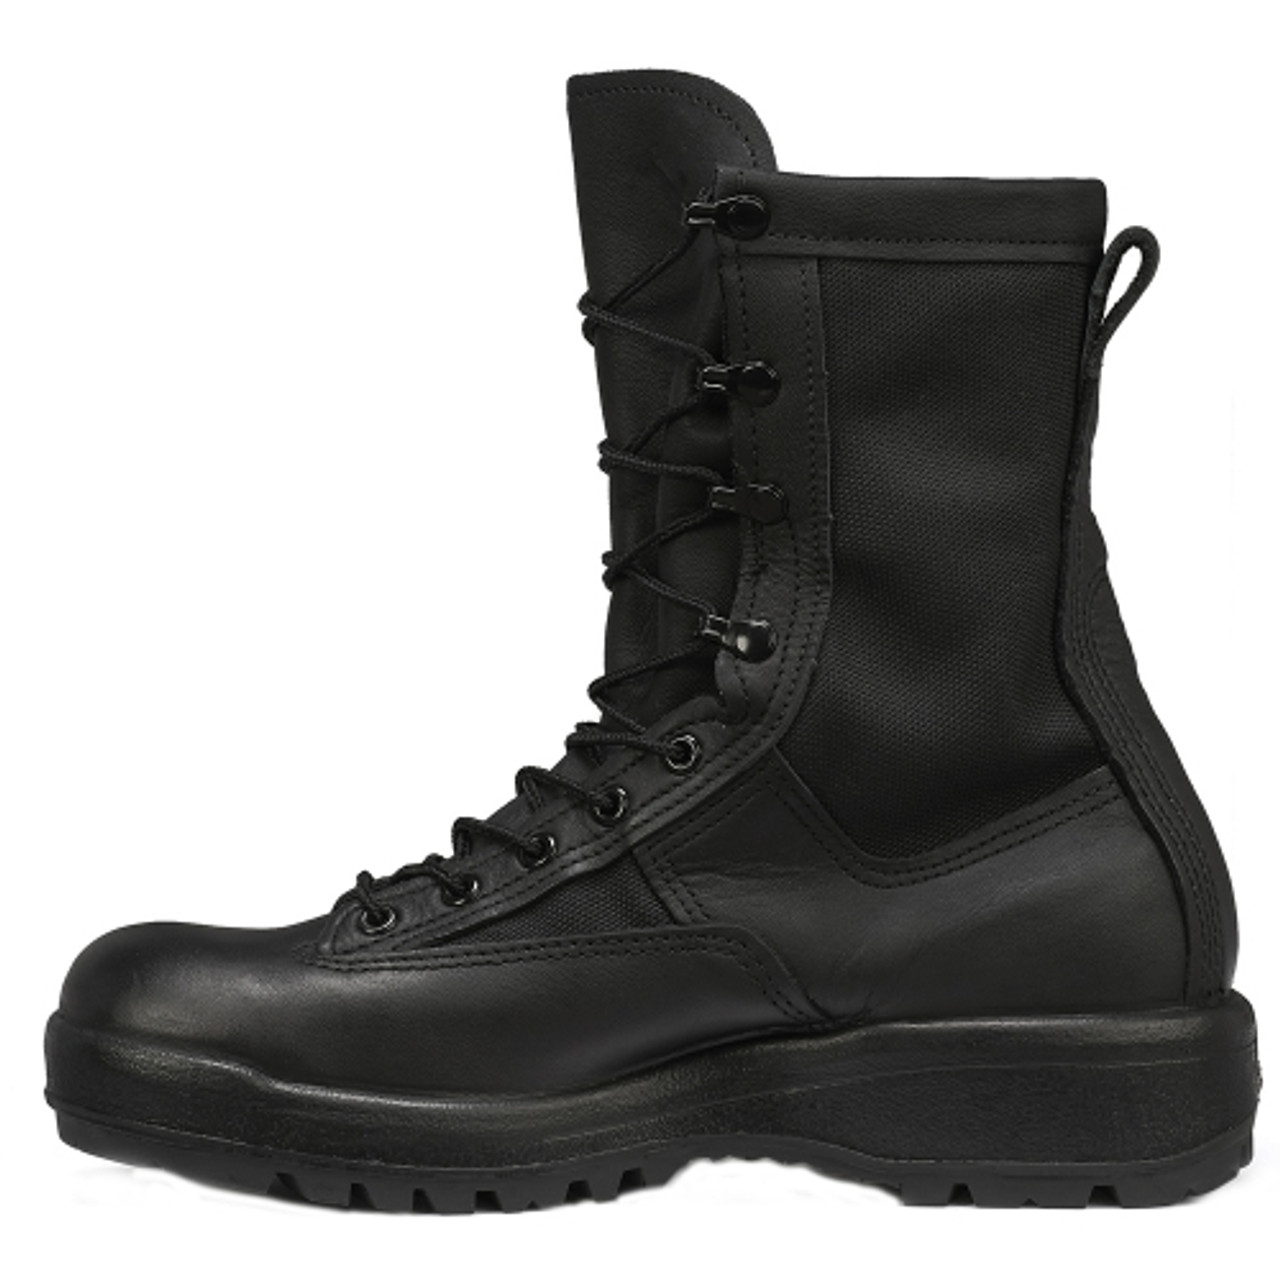 Belleville 200g Insulated Waterproof Combat and Flight Boot Black USA Made